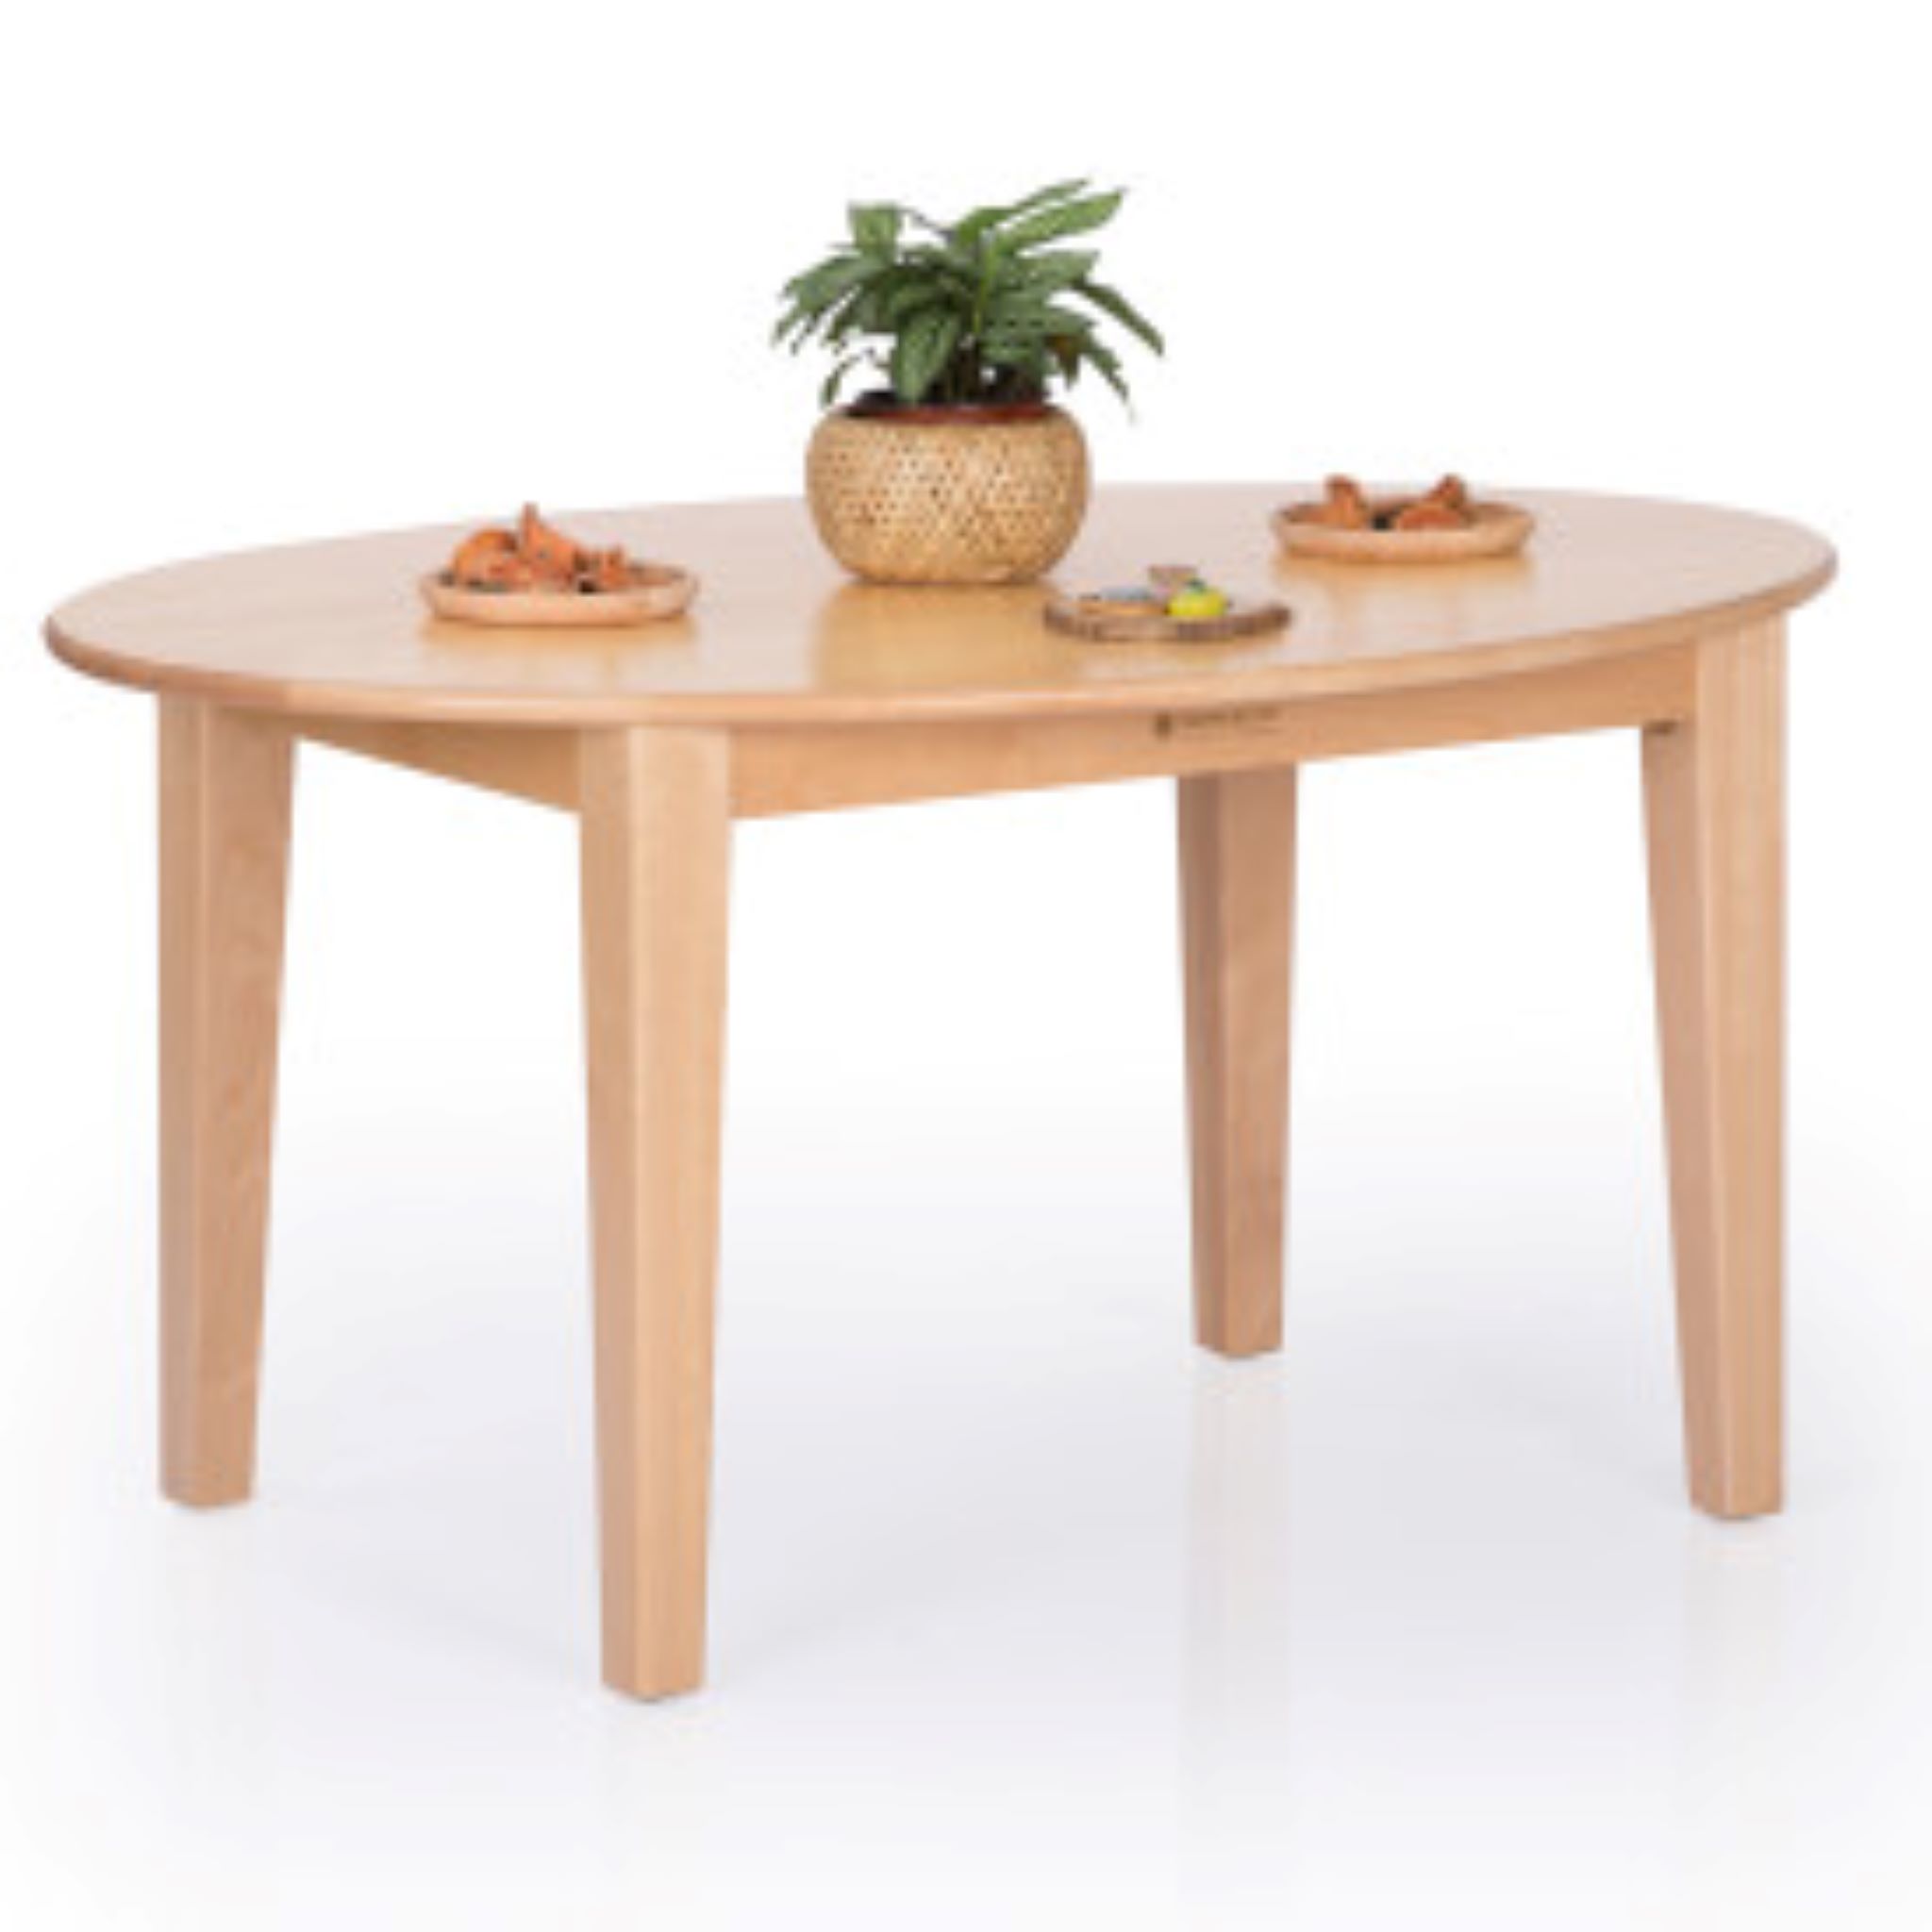 Sense of Place Oval Table